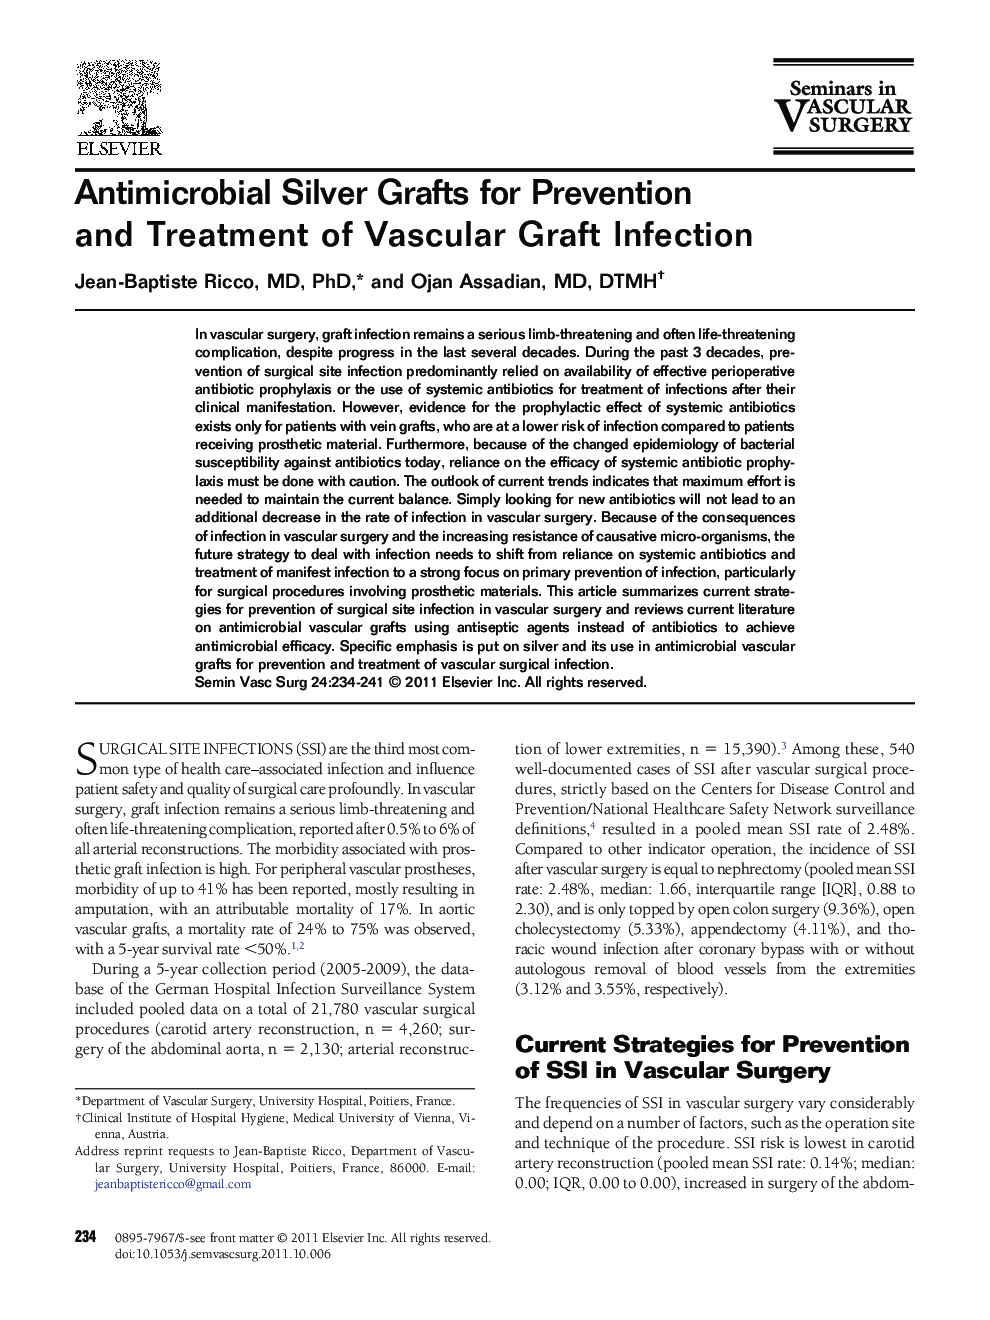 Antimicrobial Silver Grafts for Prevention and Treatment of Vascular Graft Infection